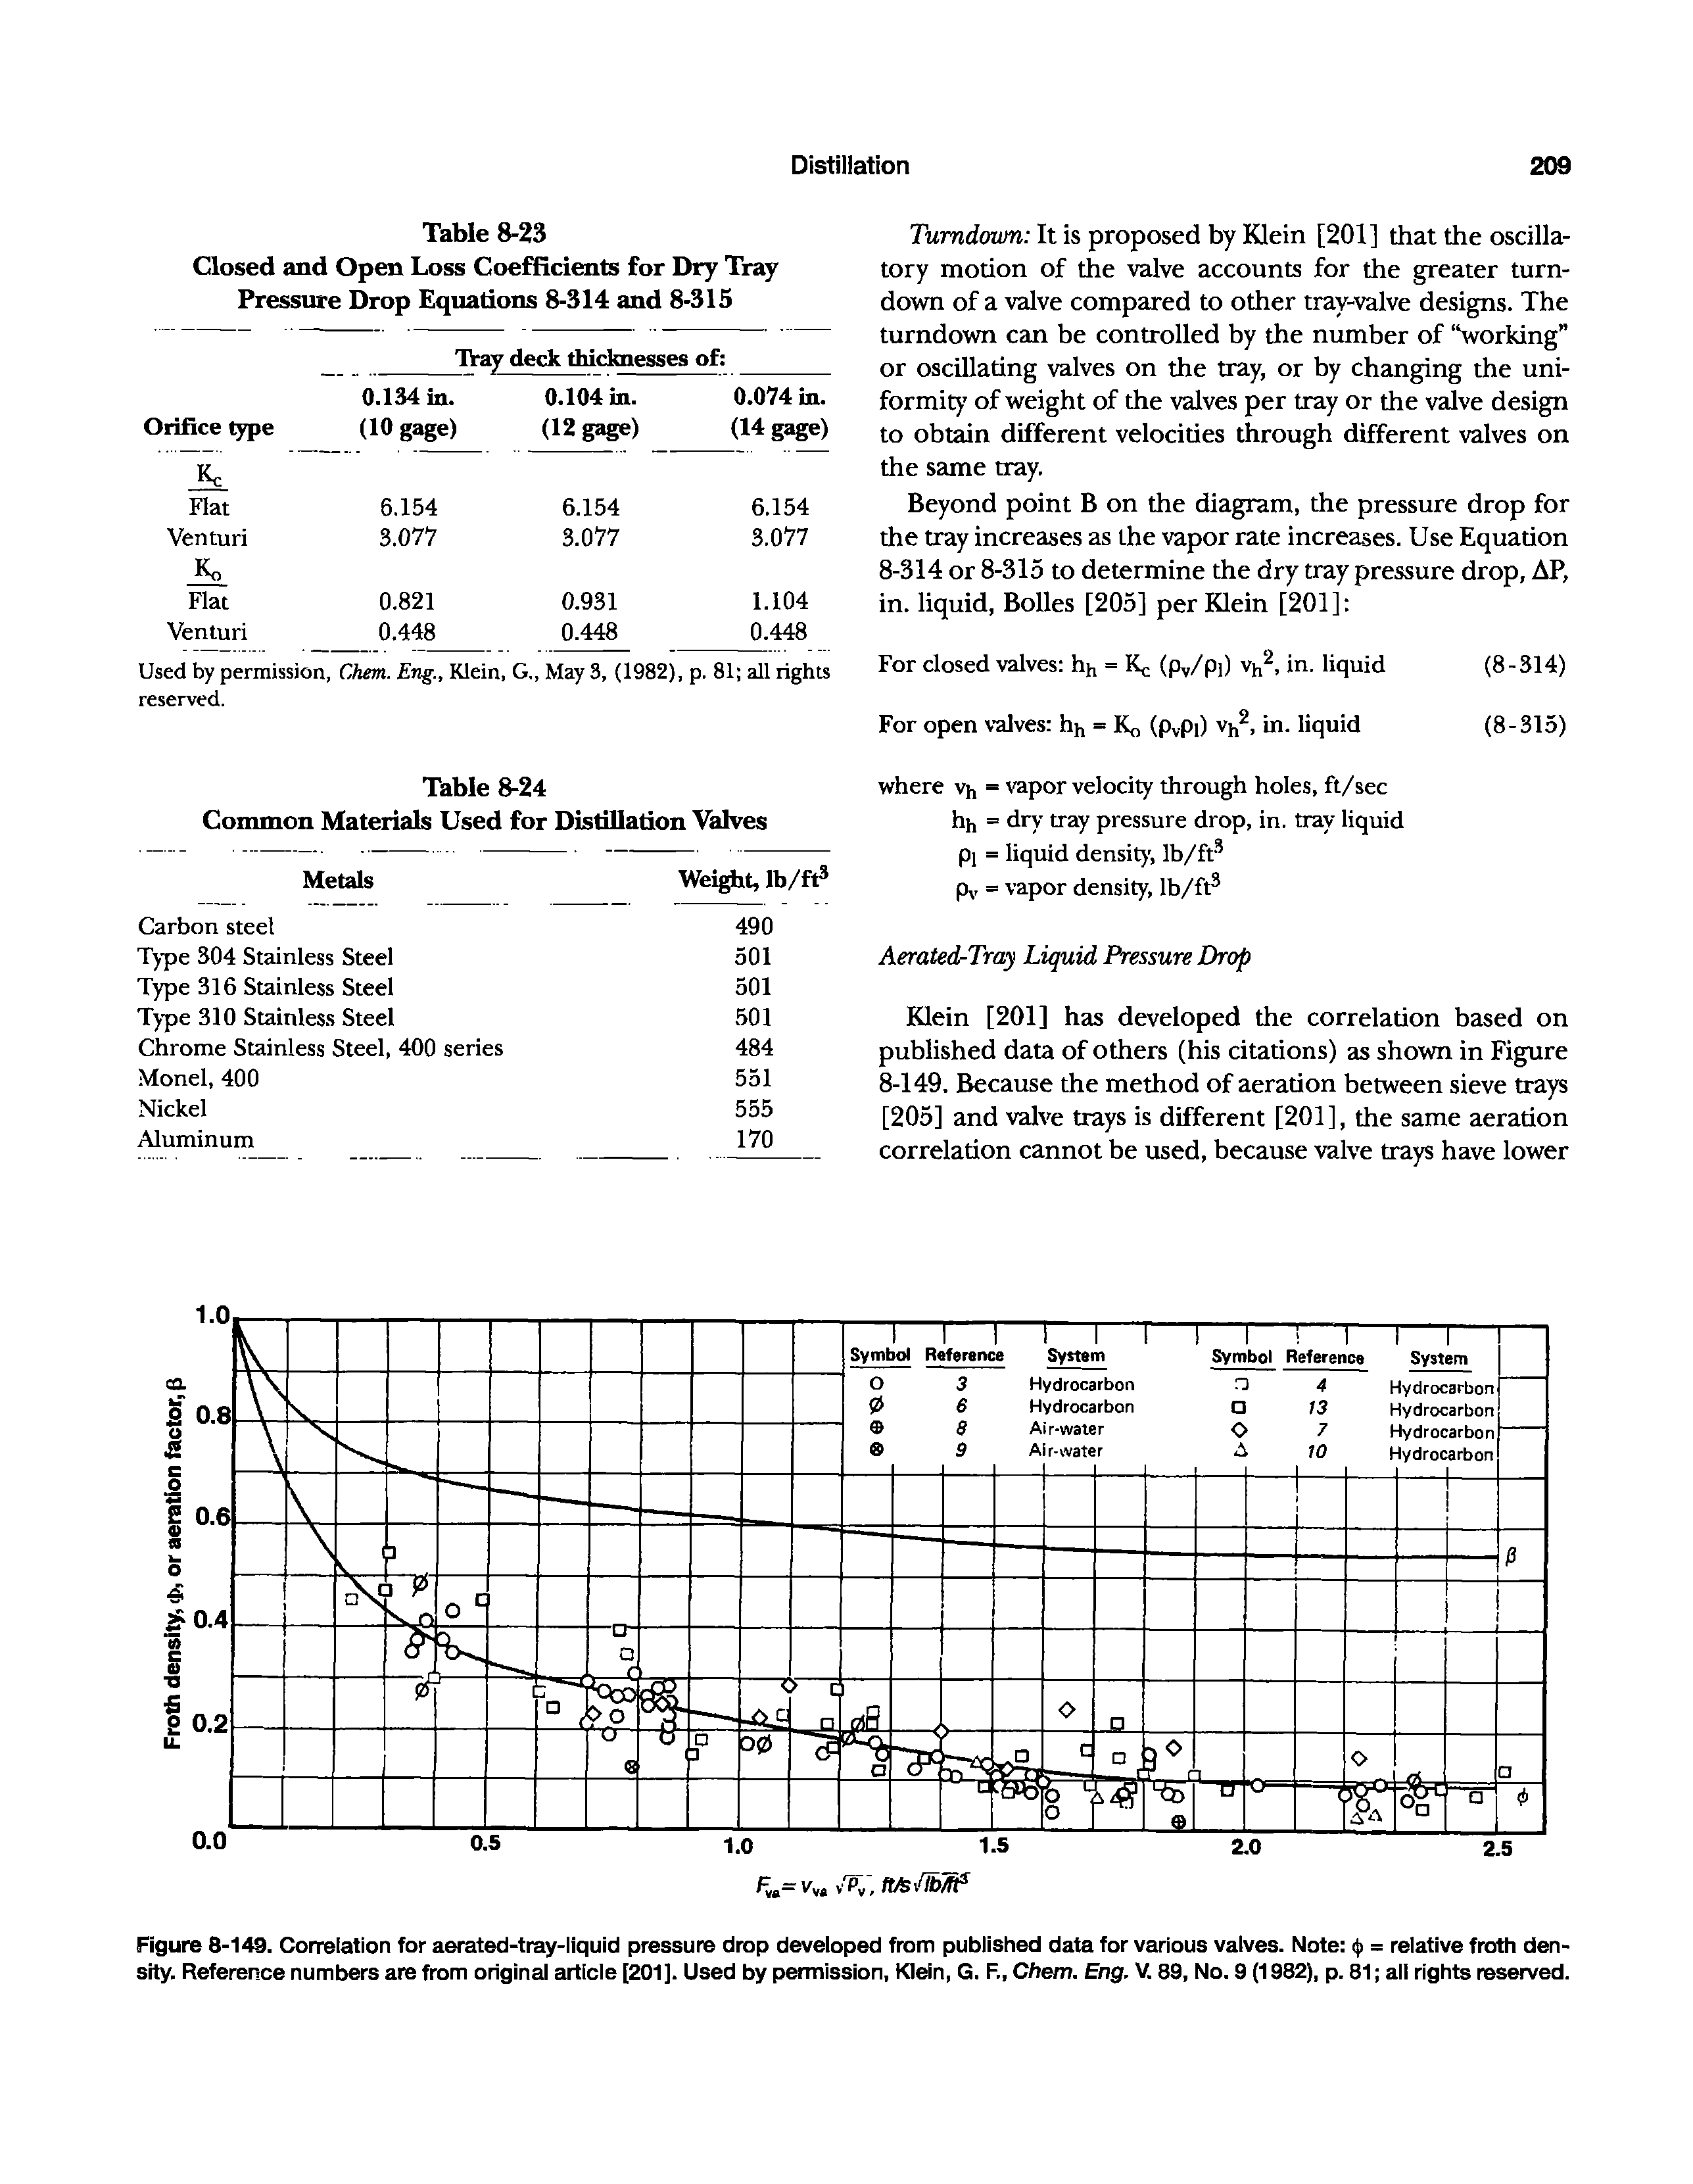 Figure 8-149. Correlation for aerated-tray-liquid pressure drop developed from published data for various valves. Note (j> = relative froth density. Reference numbers are from original article [201 ]. Used by permission, Klein, G. F., Chem. Eng. V. 89, No. 9 (1982), p. 81 all rights reserved.